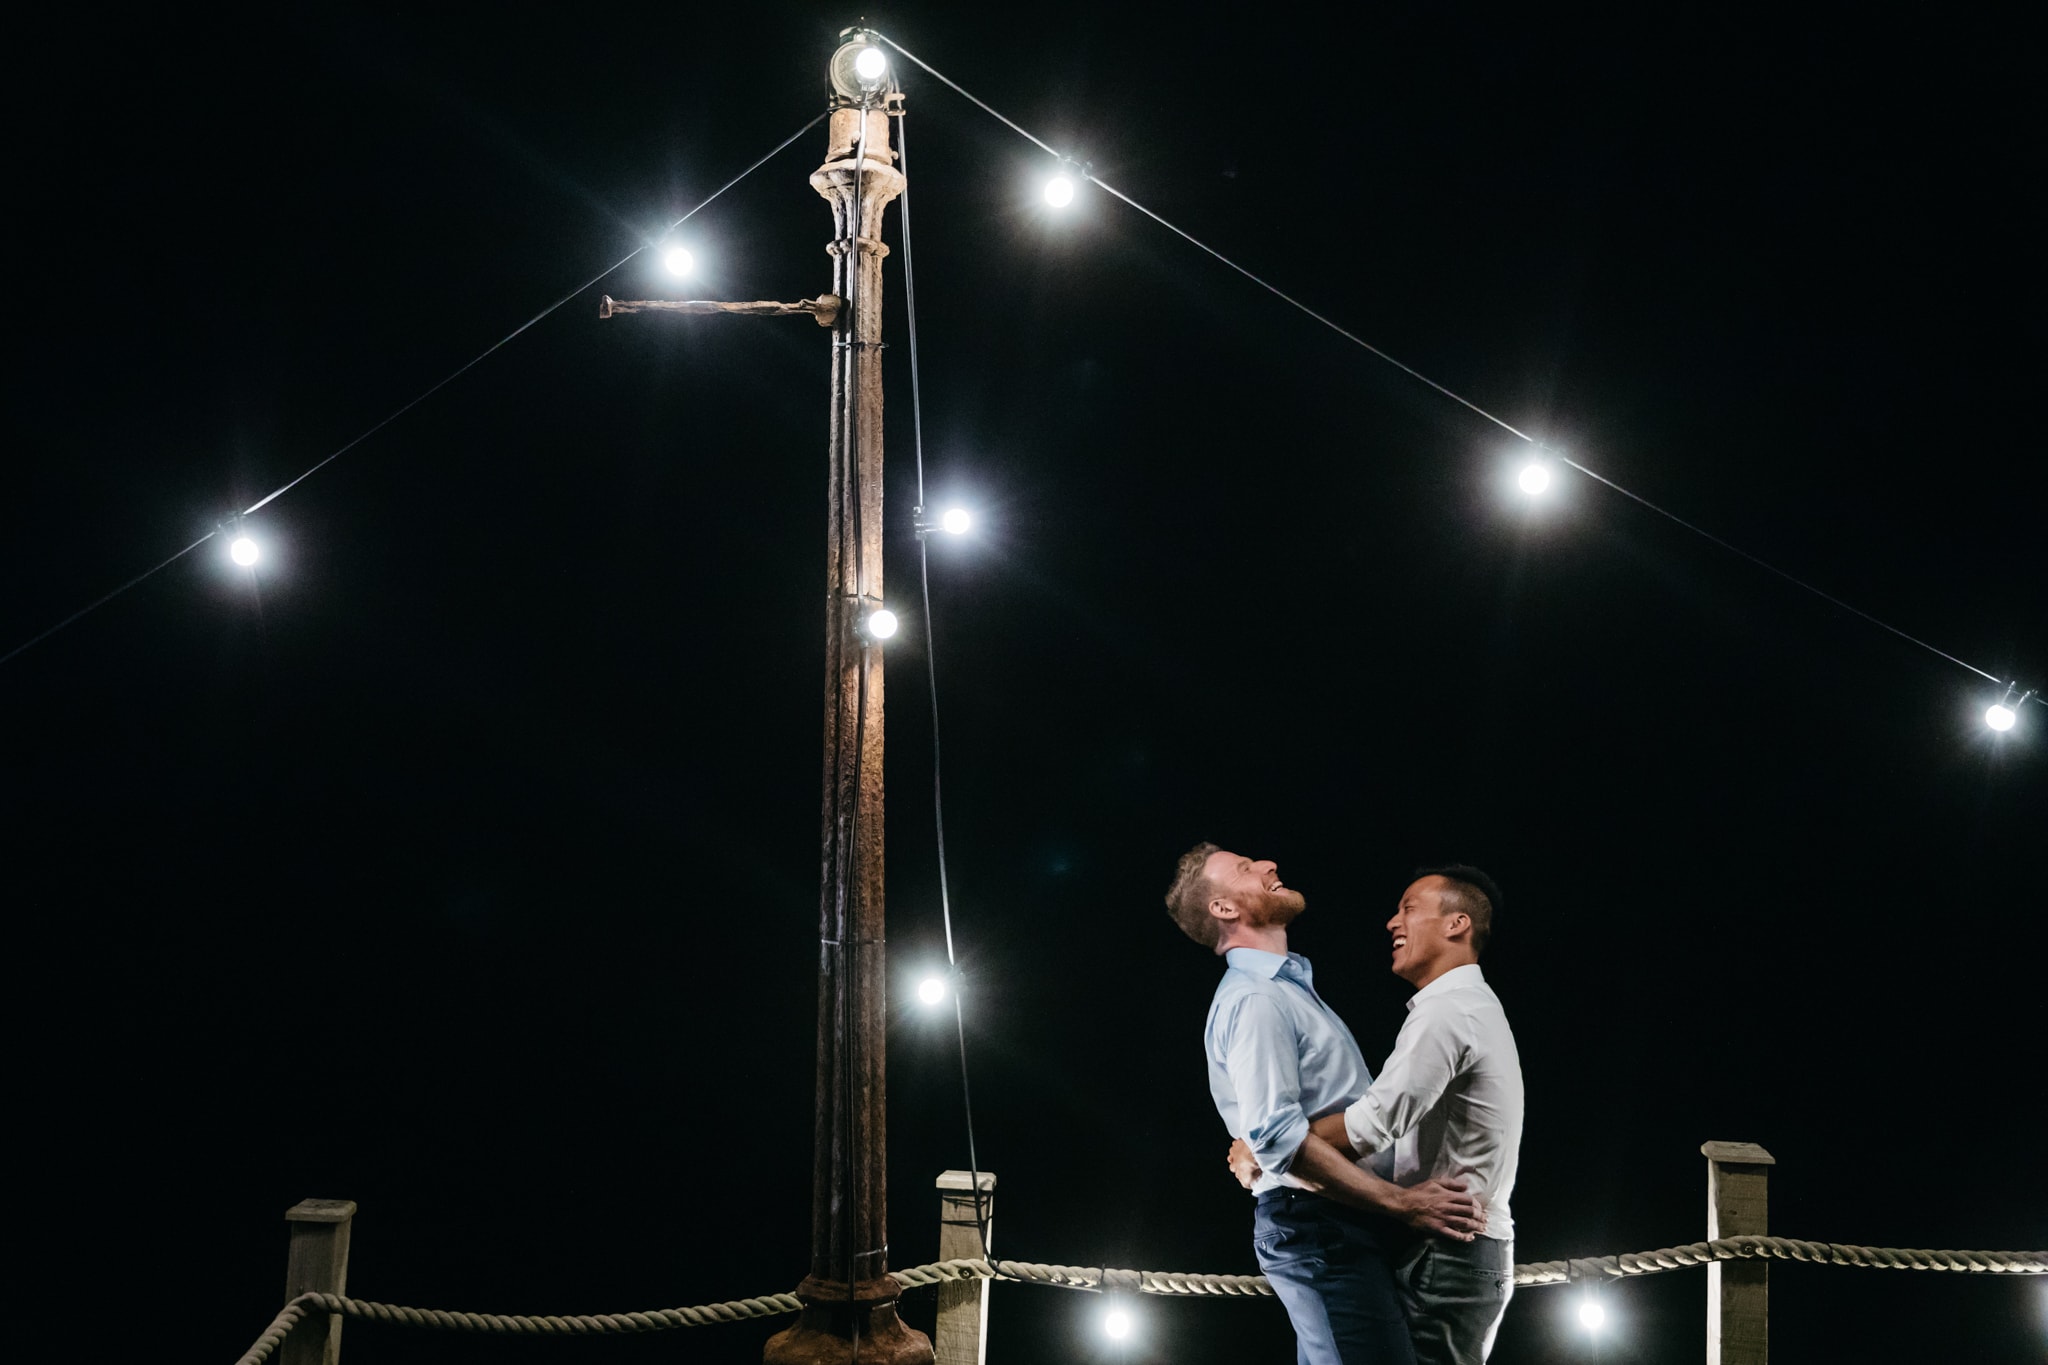 Same sex couple at the end of their wedding under festoon lighting